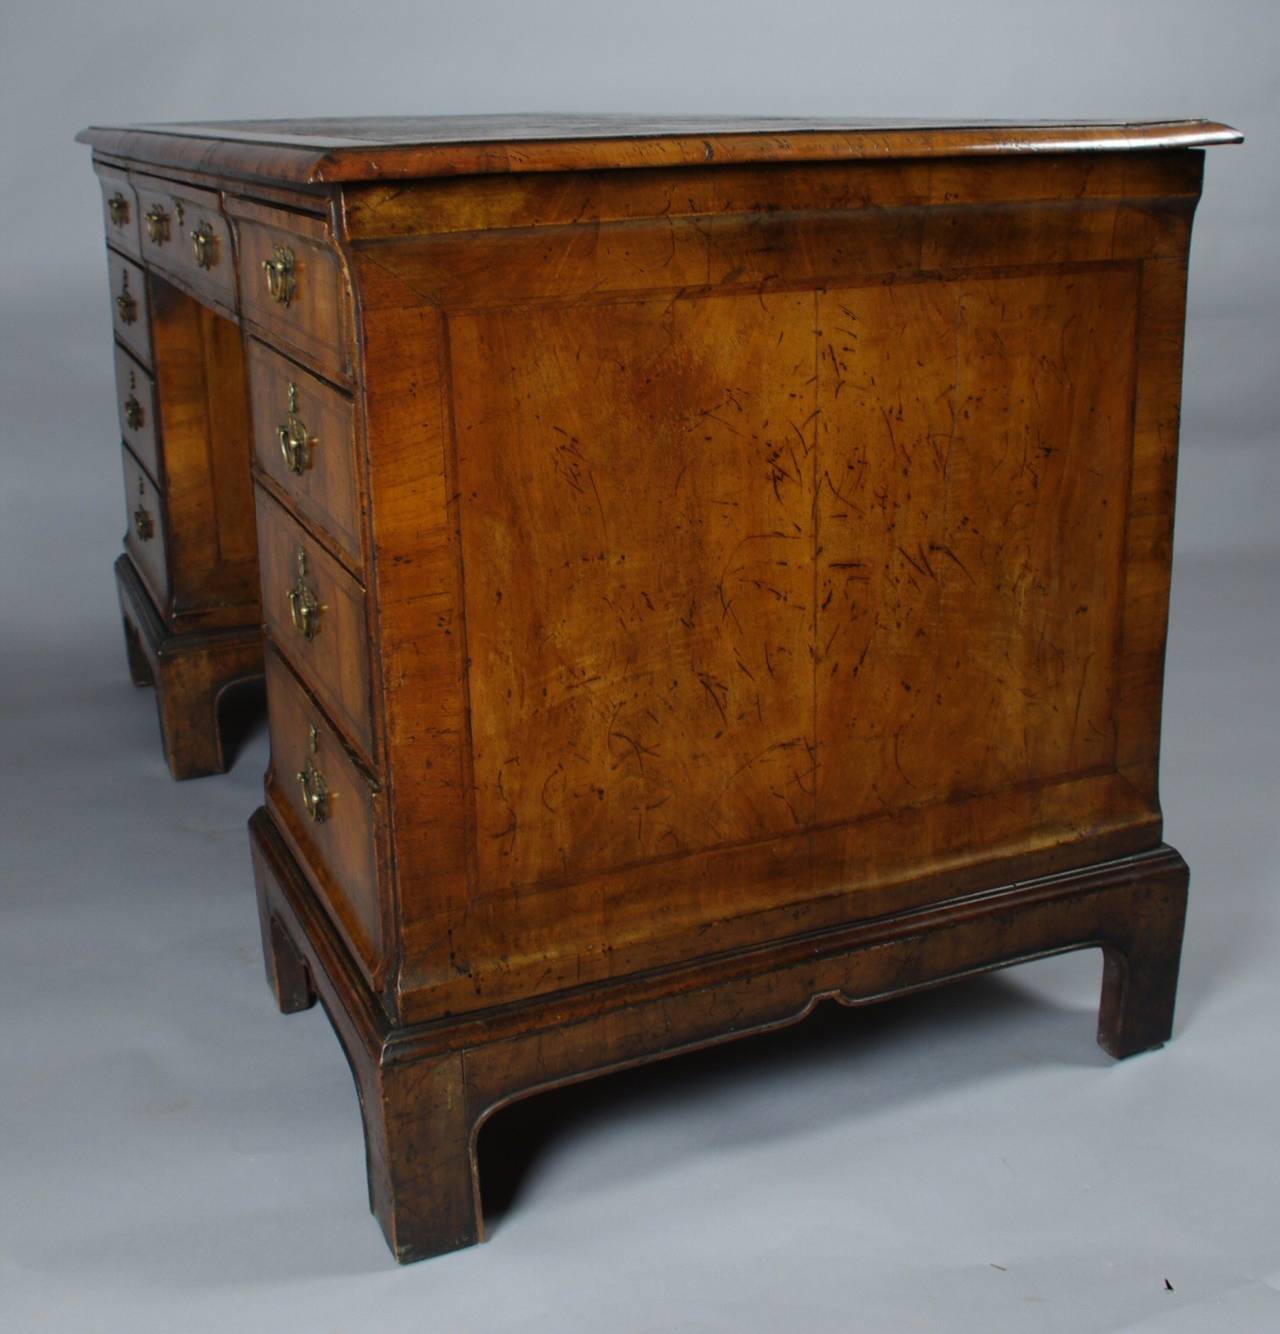 George III walnut pedestal desk, the rectangular top with beautiful early tooled leather set within a crossbanded border and molded edge; the well figured drawers with herringbone stringing and replaced hardware raised on bracket feet with a beaded